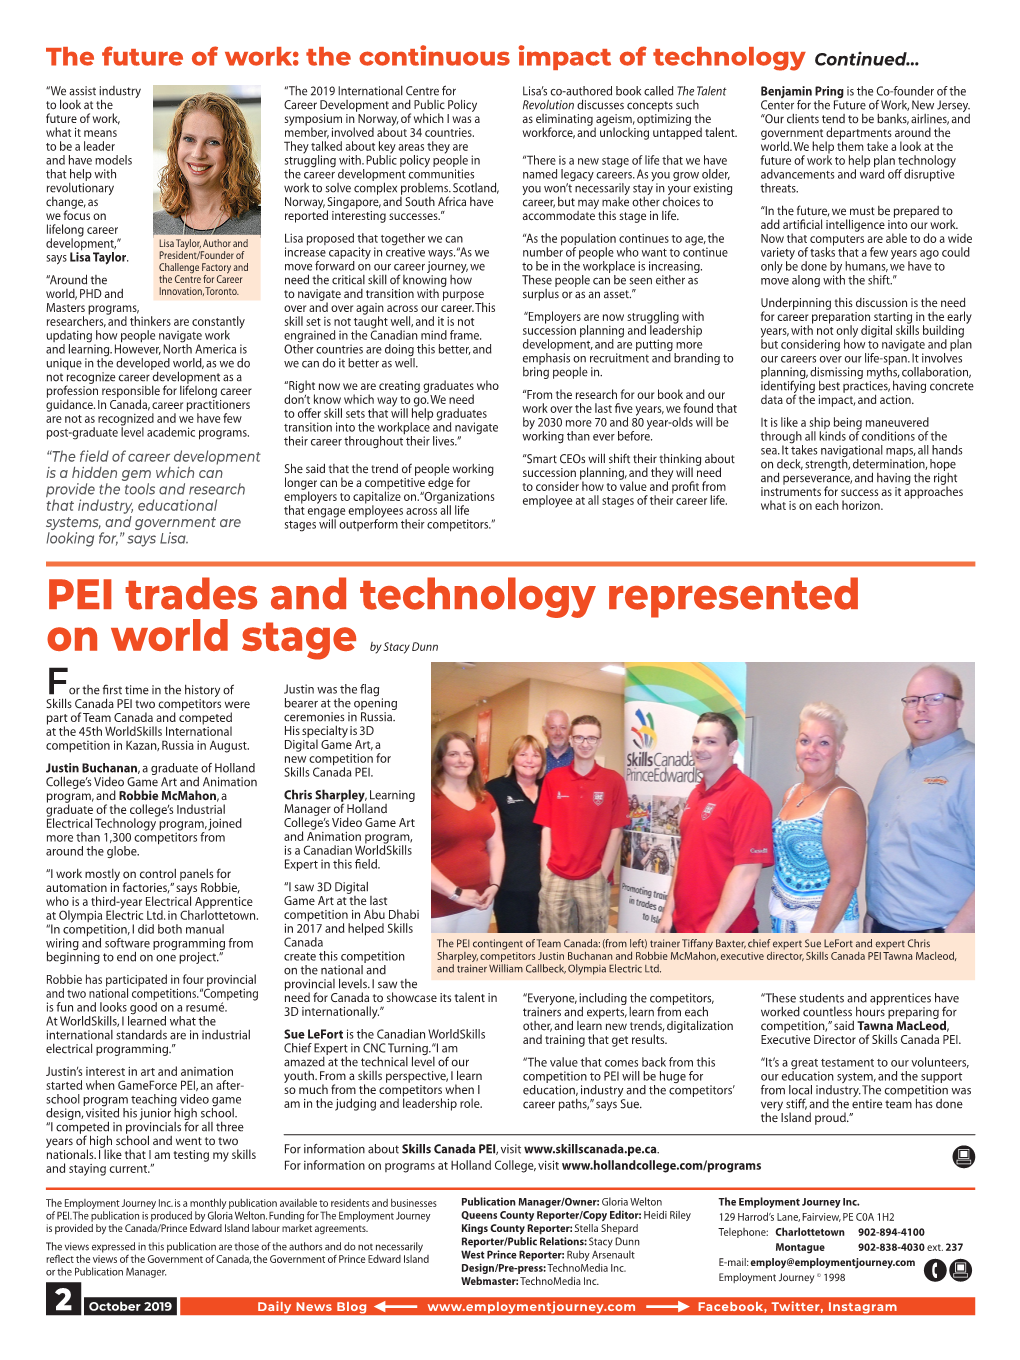 PEI Trades and Technology Represented on World Stage by Stacy Dunn